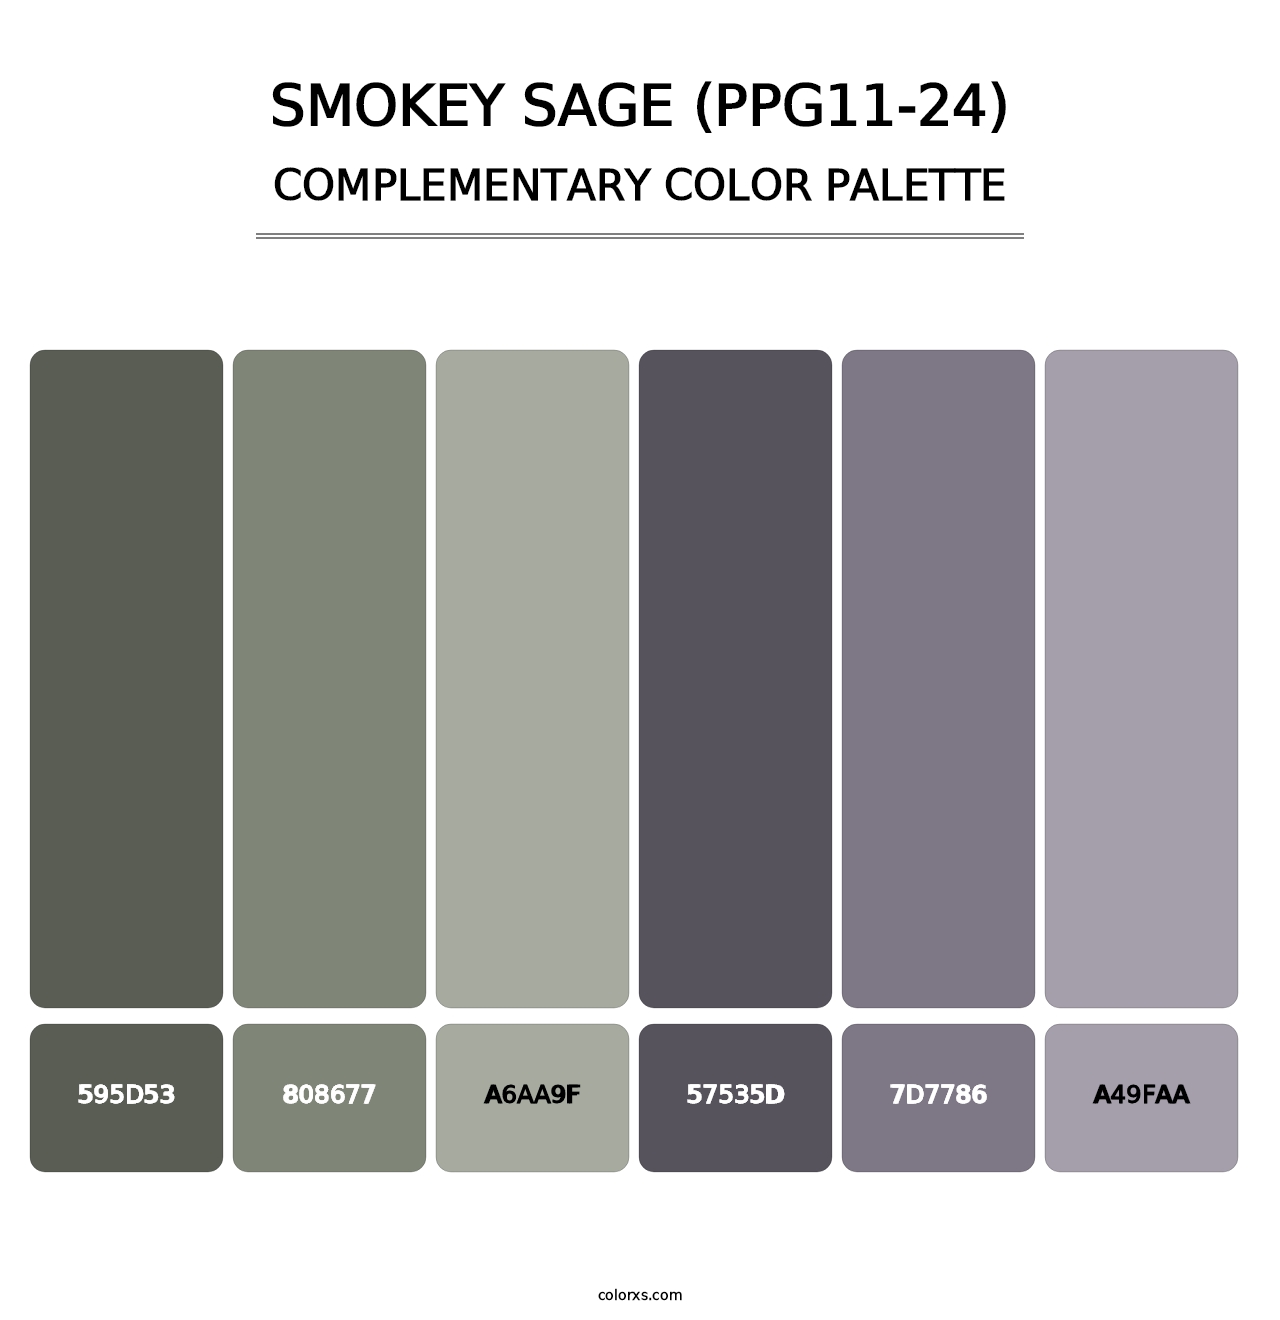 Smokey Sage (PPG11-24) - Complementary Color Palette